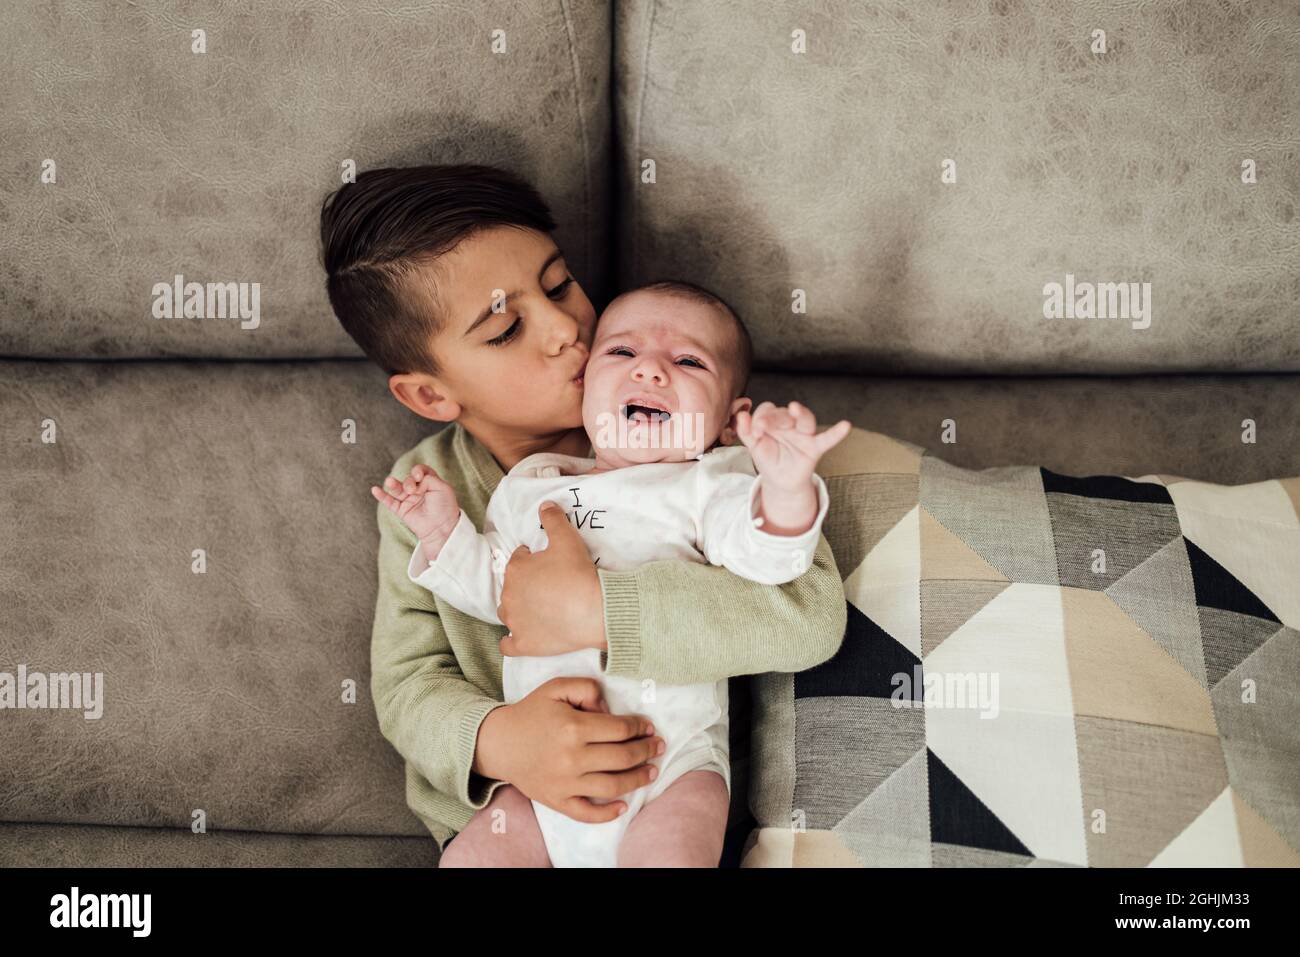 Young boy kissing his baby sister on the cheek while lying together on the sofa at home. Stock Photo